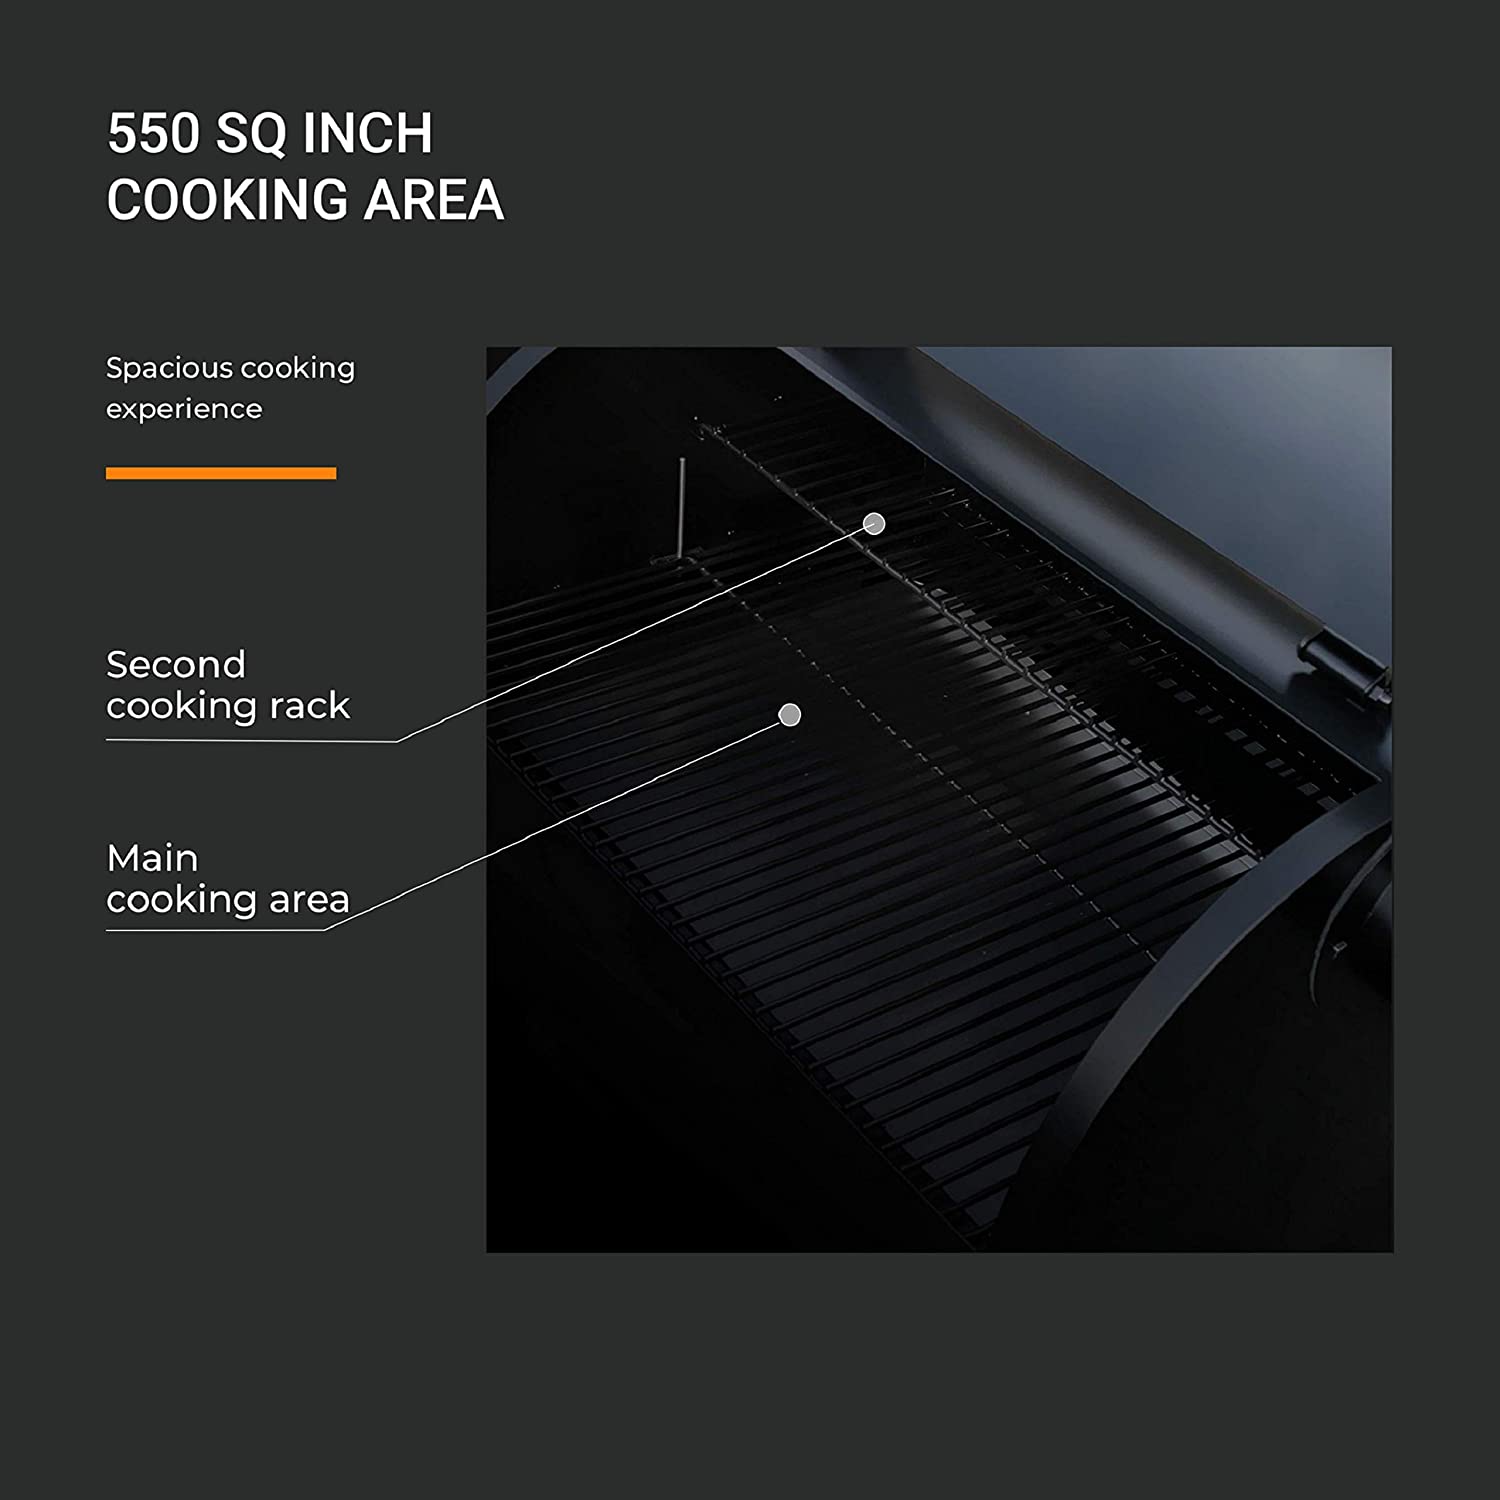 Z GRILLS ZPG 550B 2020 Upgrade Wood Pellet Grill Smoker 8 in 1 BBQ Grill Auto Temperature Control 550 sq 538sq in Black - image 5 of 10